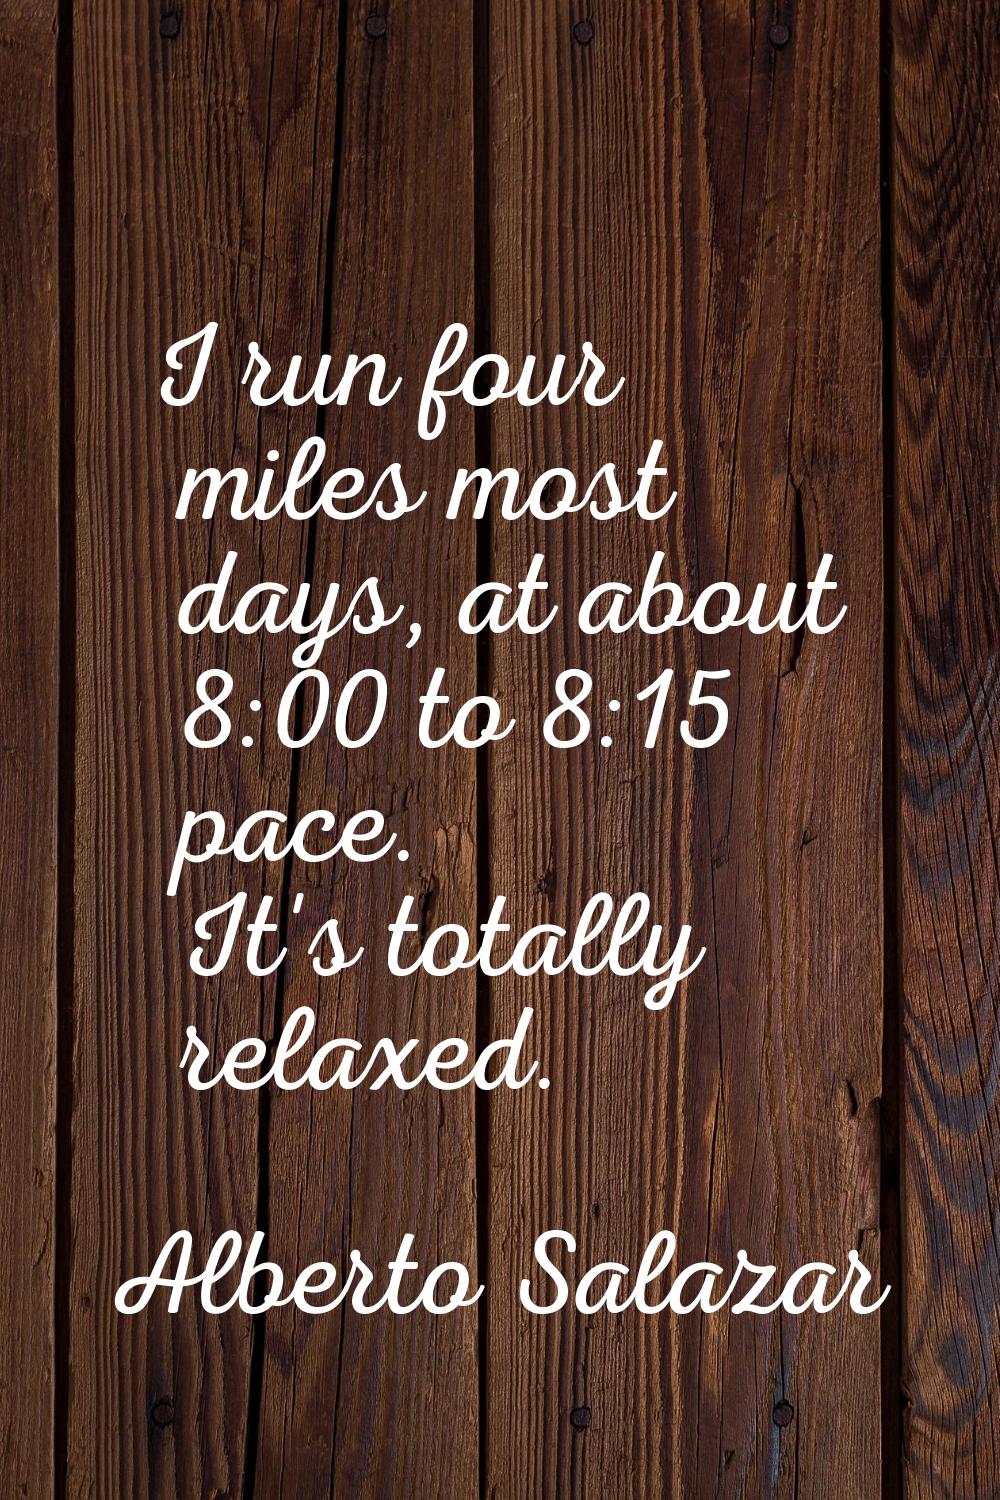 I run four miles most days, at about 8:00 to 8:15 pace. It's totally relaxed.